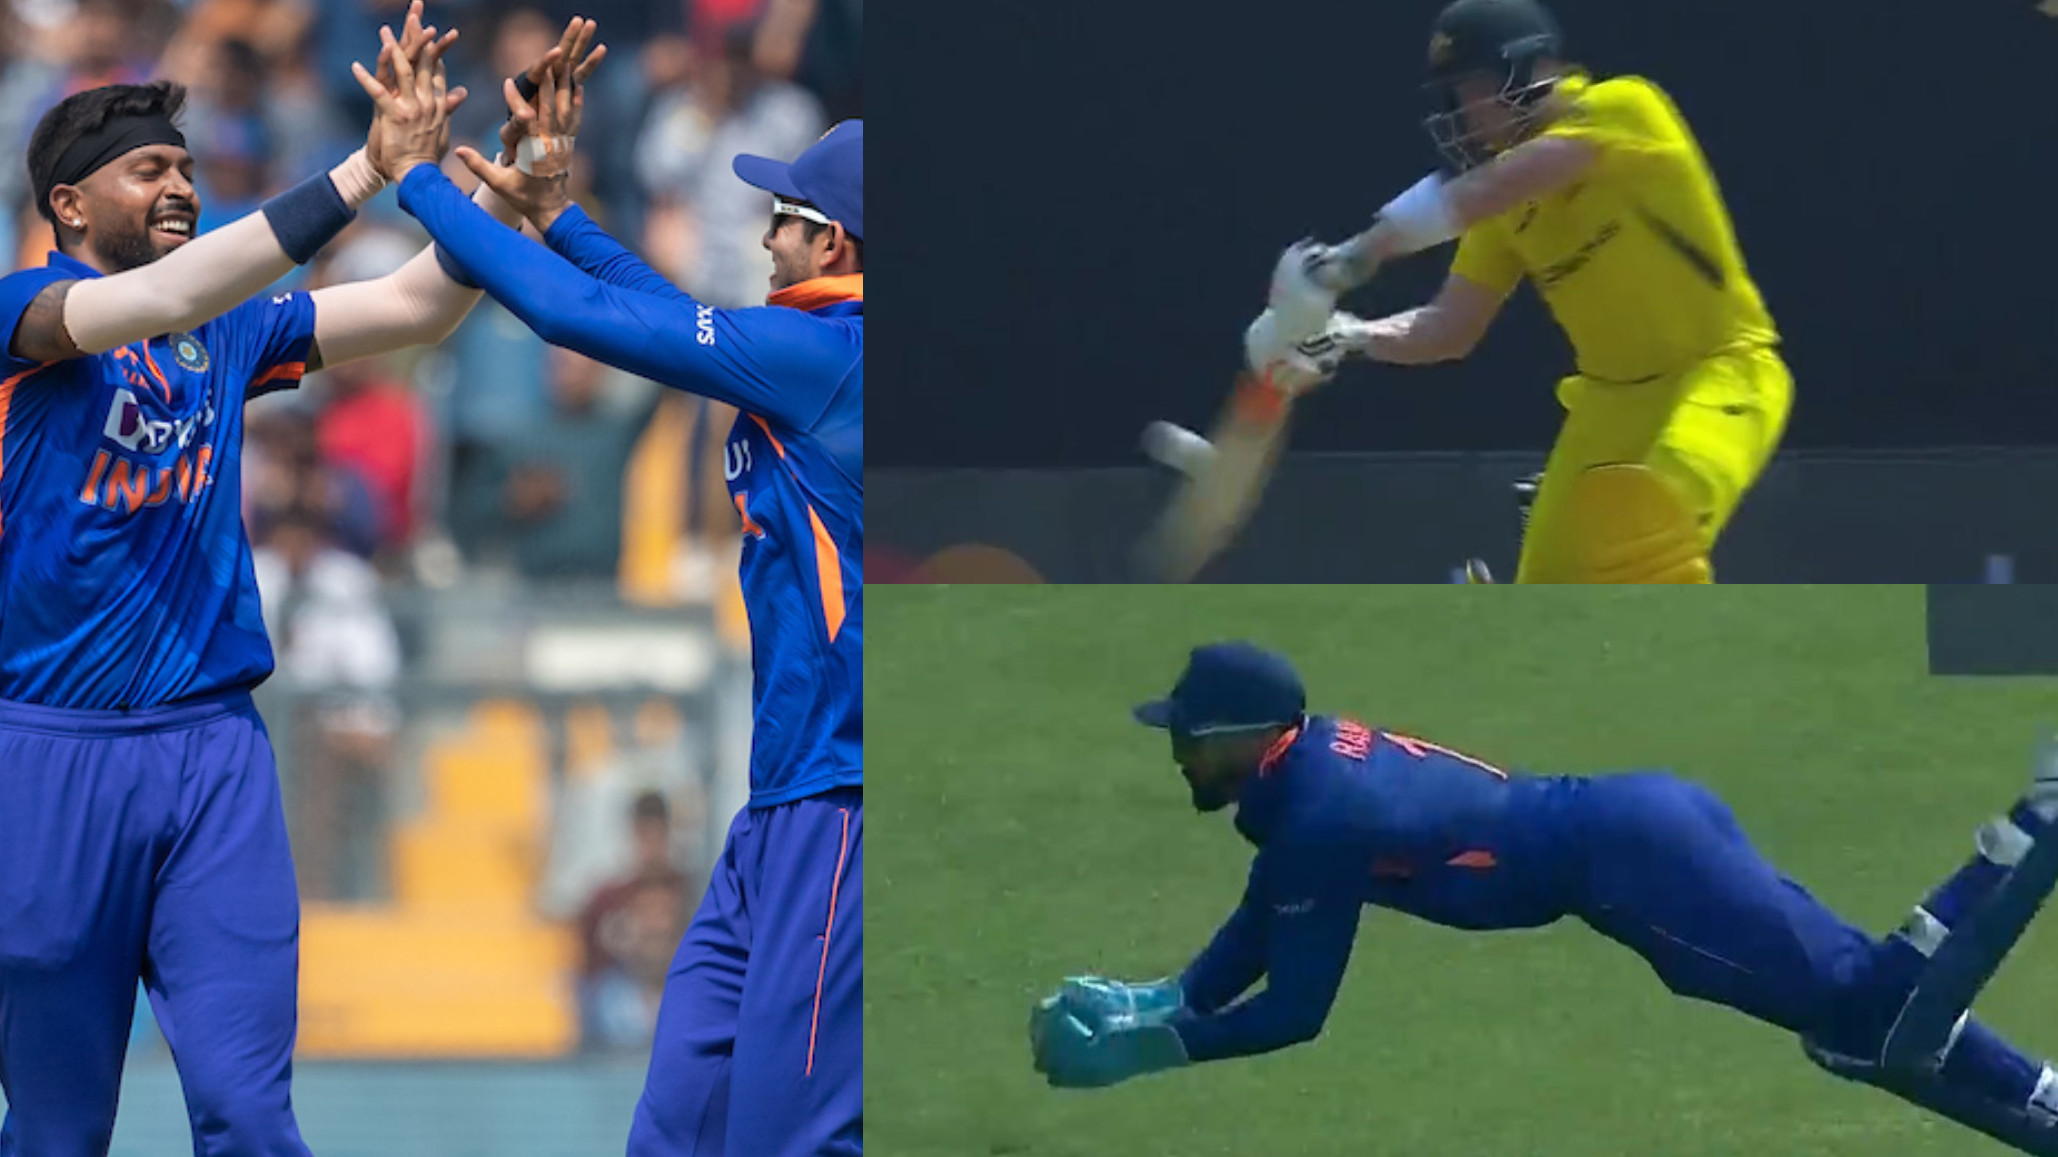 IND v AUS 2023: WATCH- KL Rahul’s brilliant diving catch ends Steve Smith’s stay at the crease